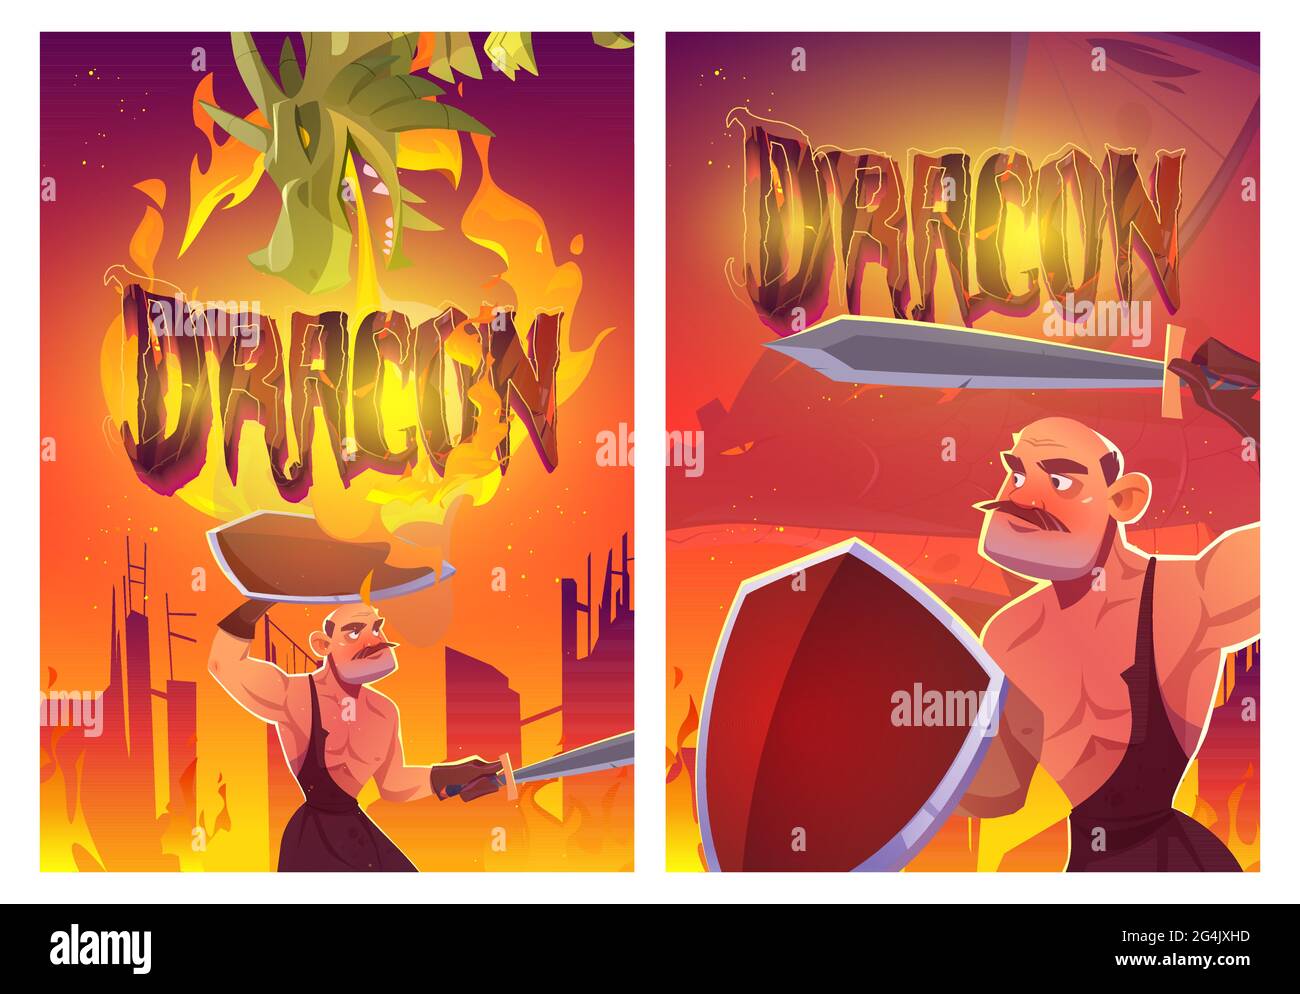 Dragon attack knight cartoon posters, magic character breathing with fire fighting with medieval warrior with sword and shield. Epic scene for fairytale game, fantasy movie or book, vector banners Stock Vector